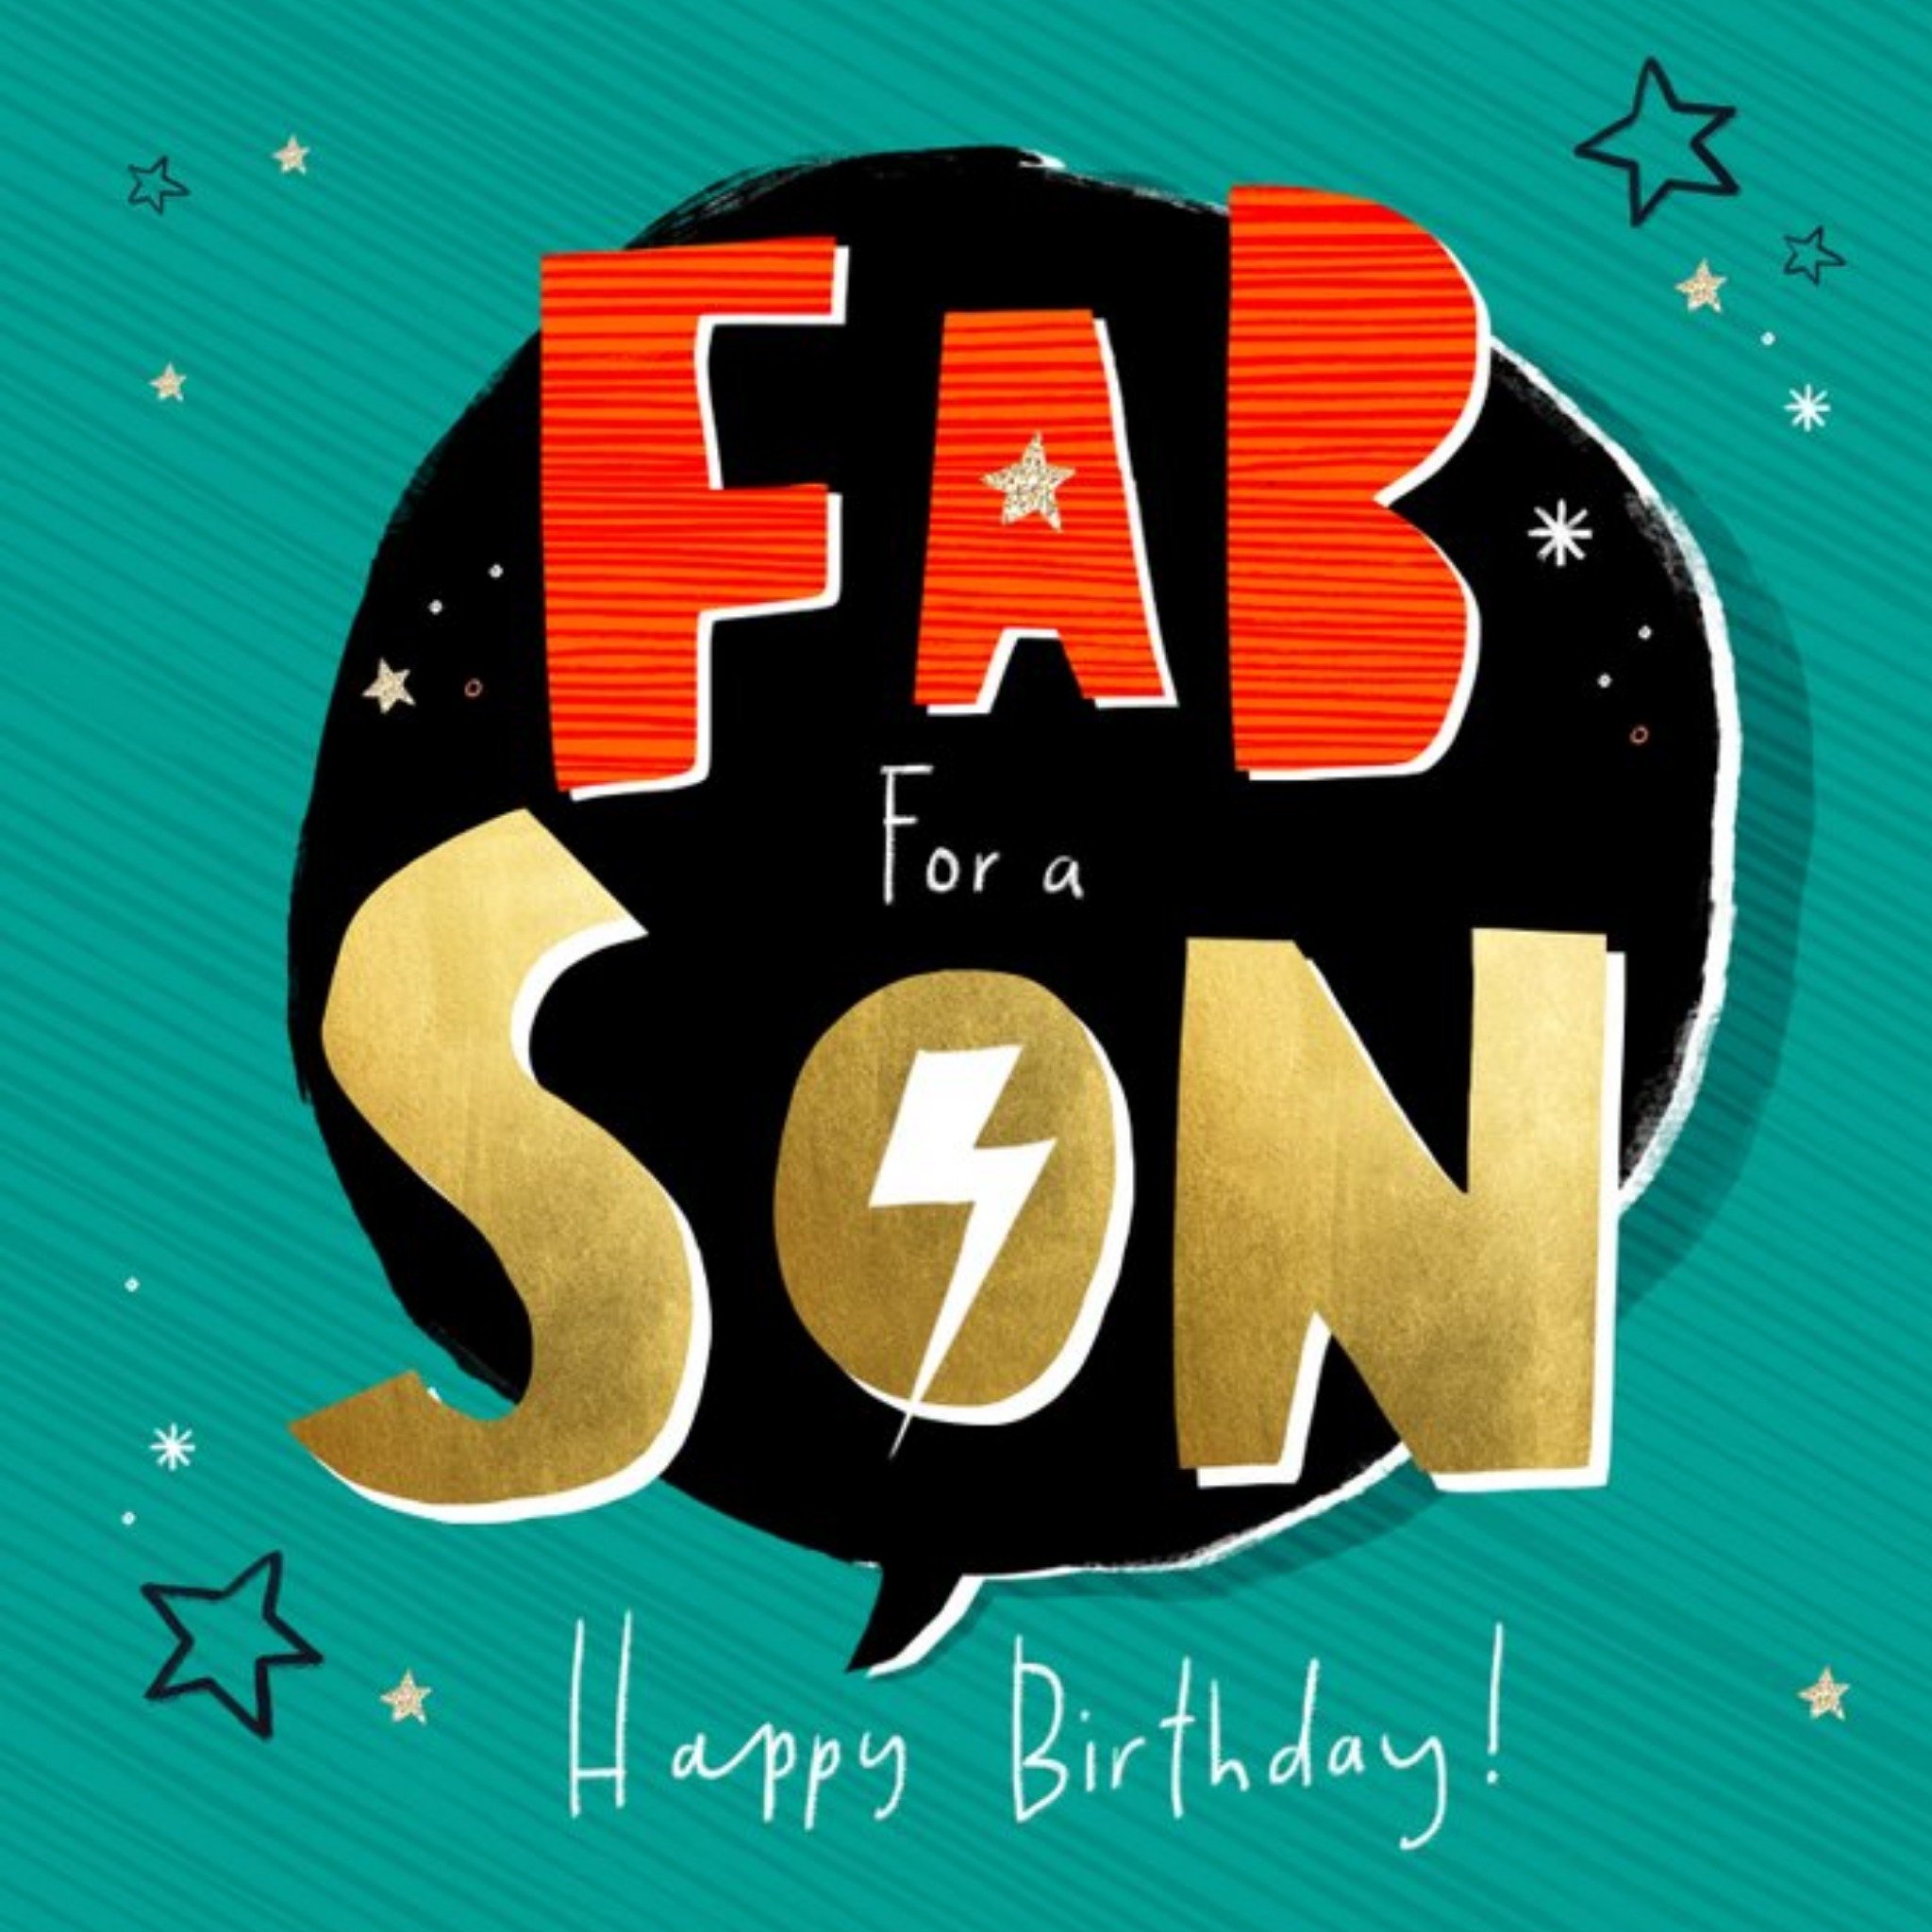 Moonpig Abstract Typographic Design For A Fab Son Happy Birthday Card, Square